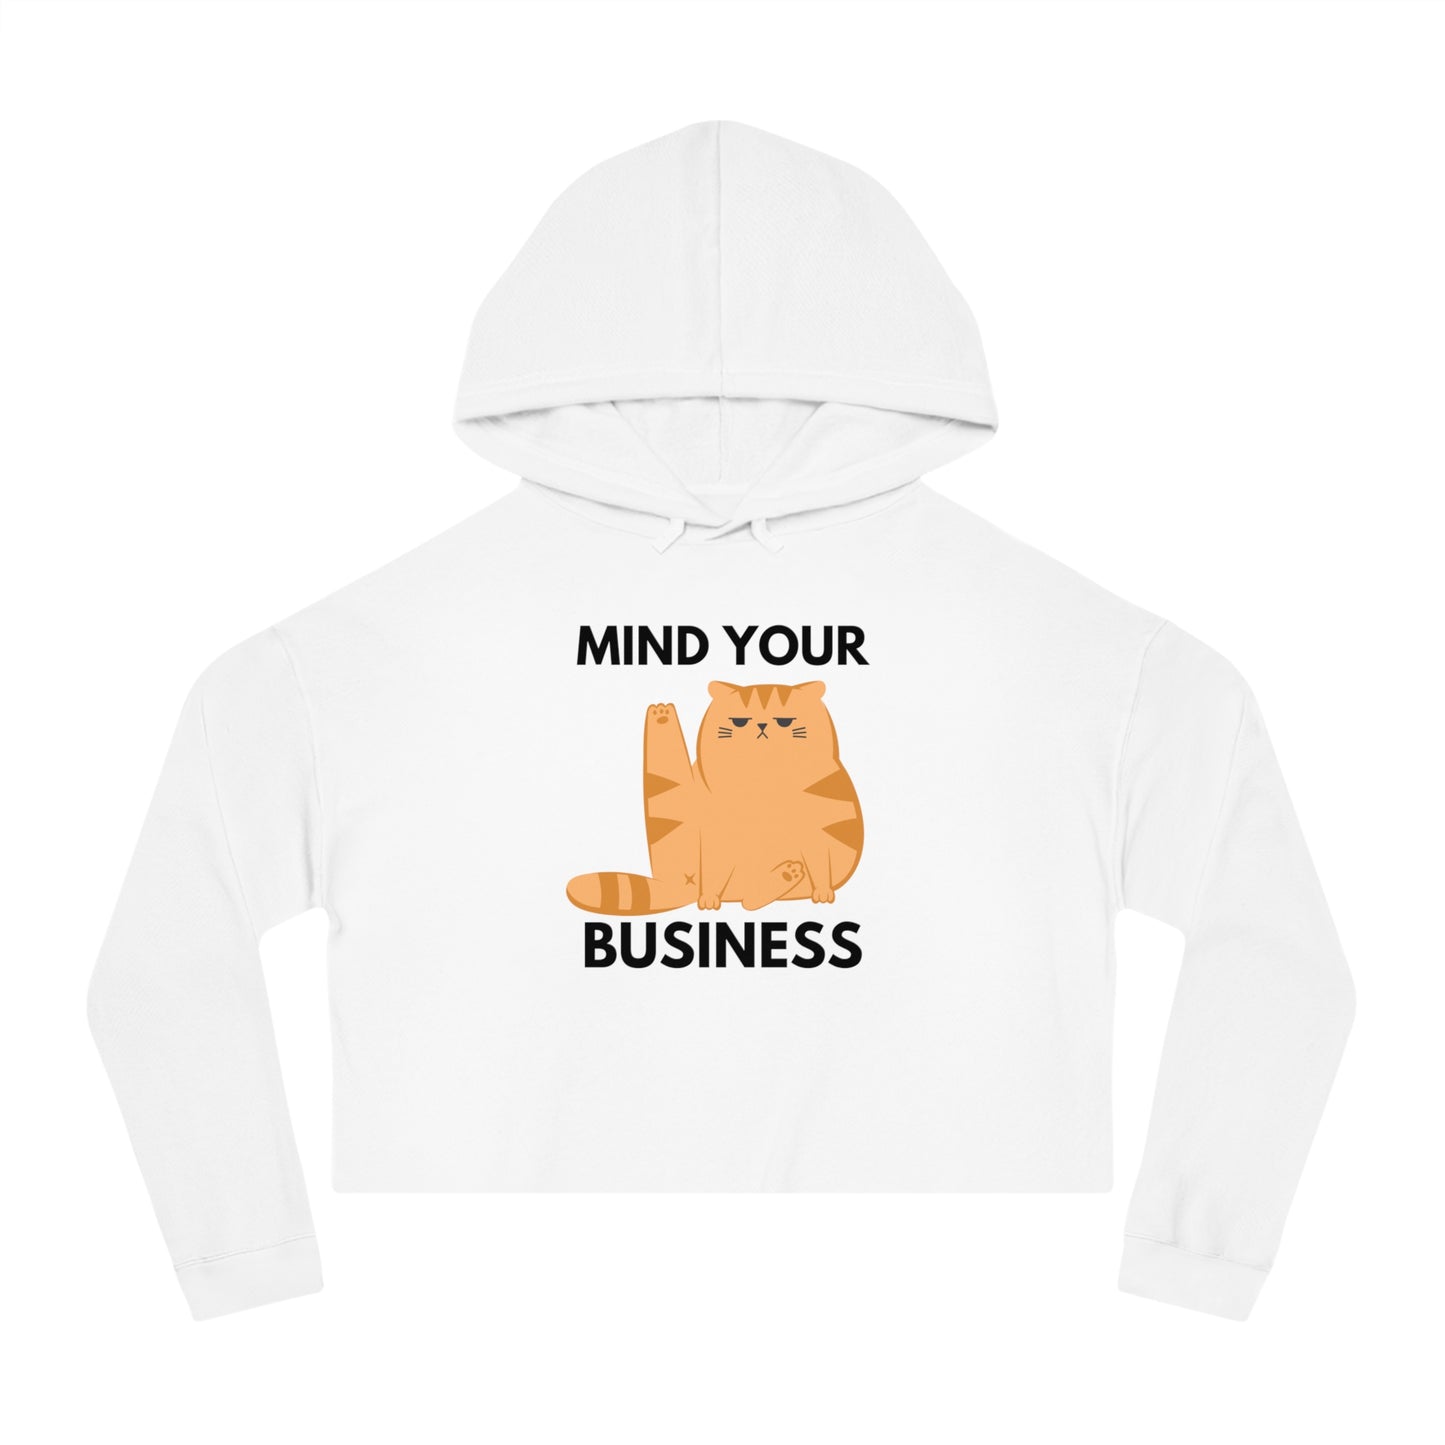 Mind your business! Cropped Hooded Sweatshirt